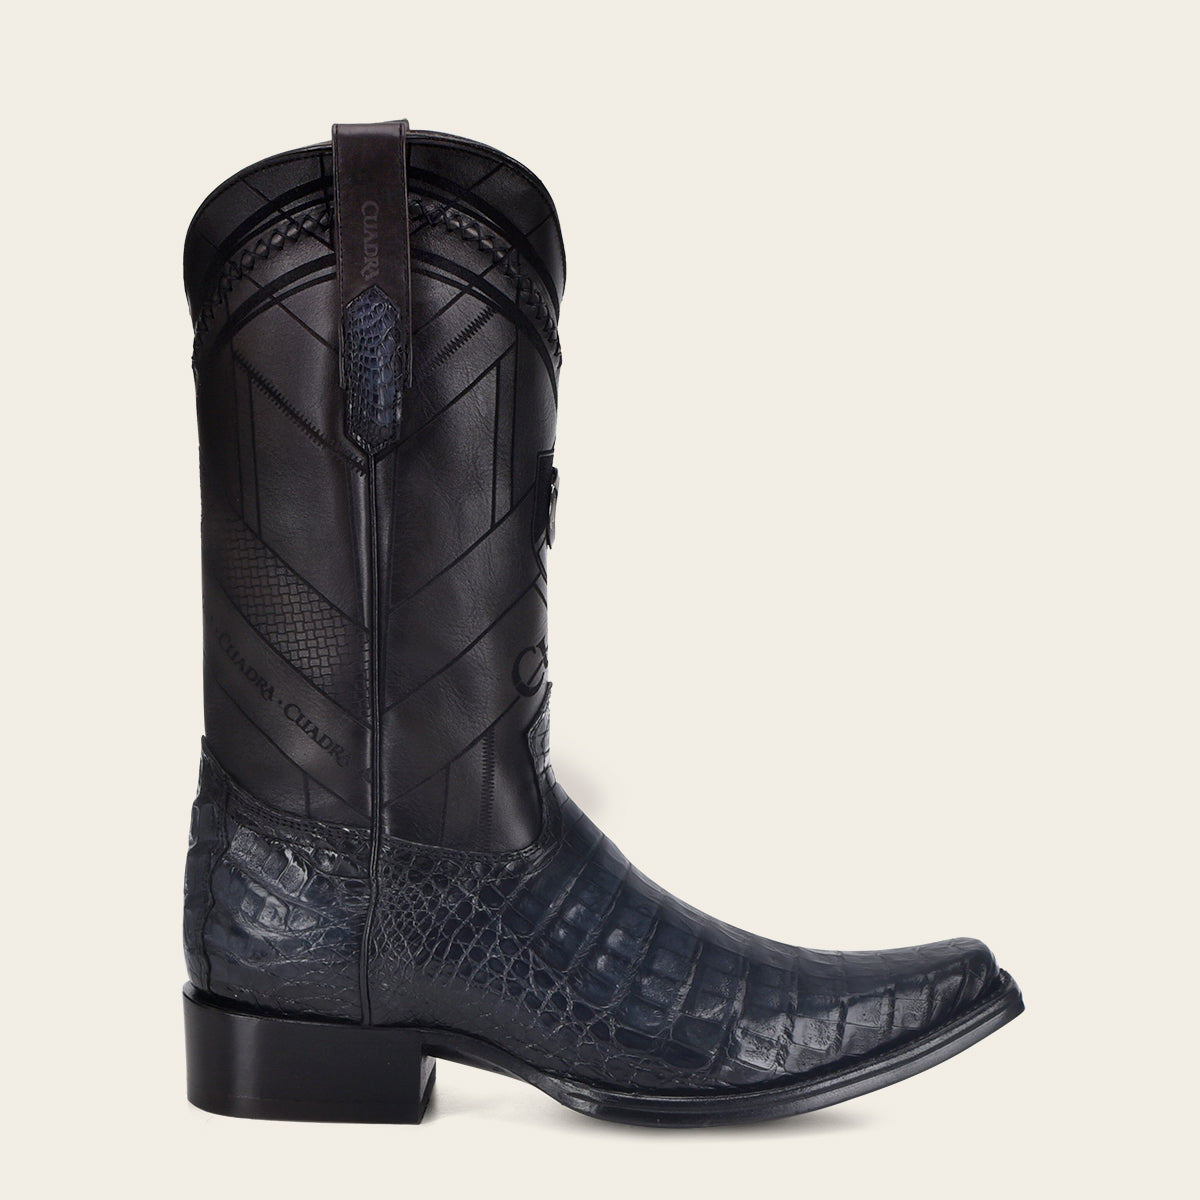 Engraved exotic blue leather boot